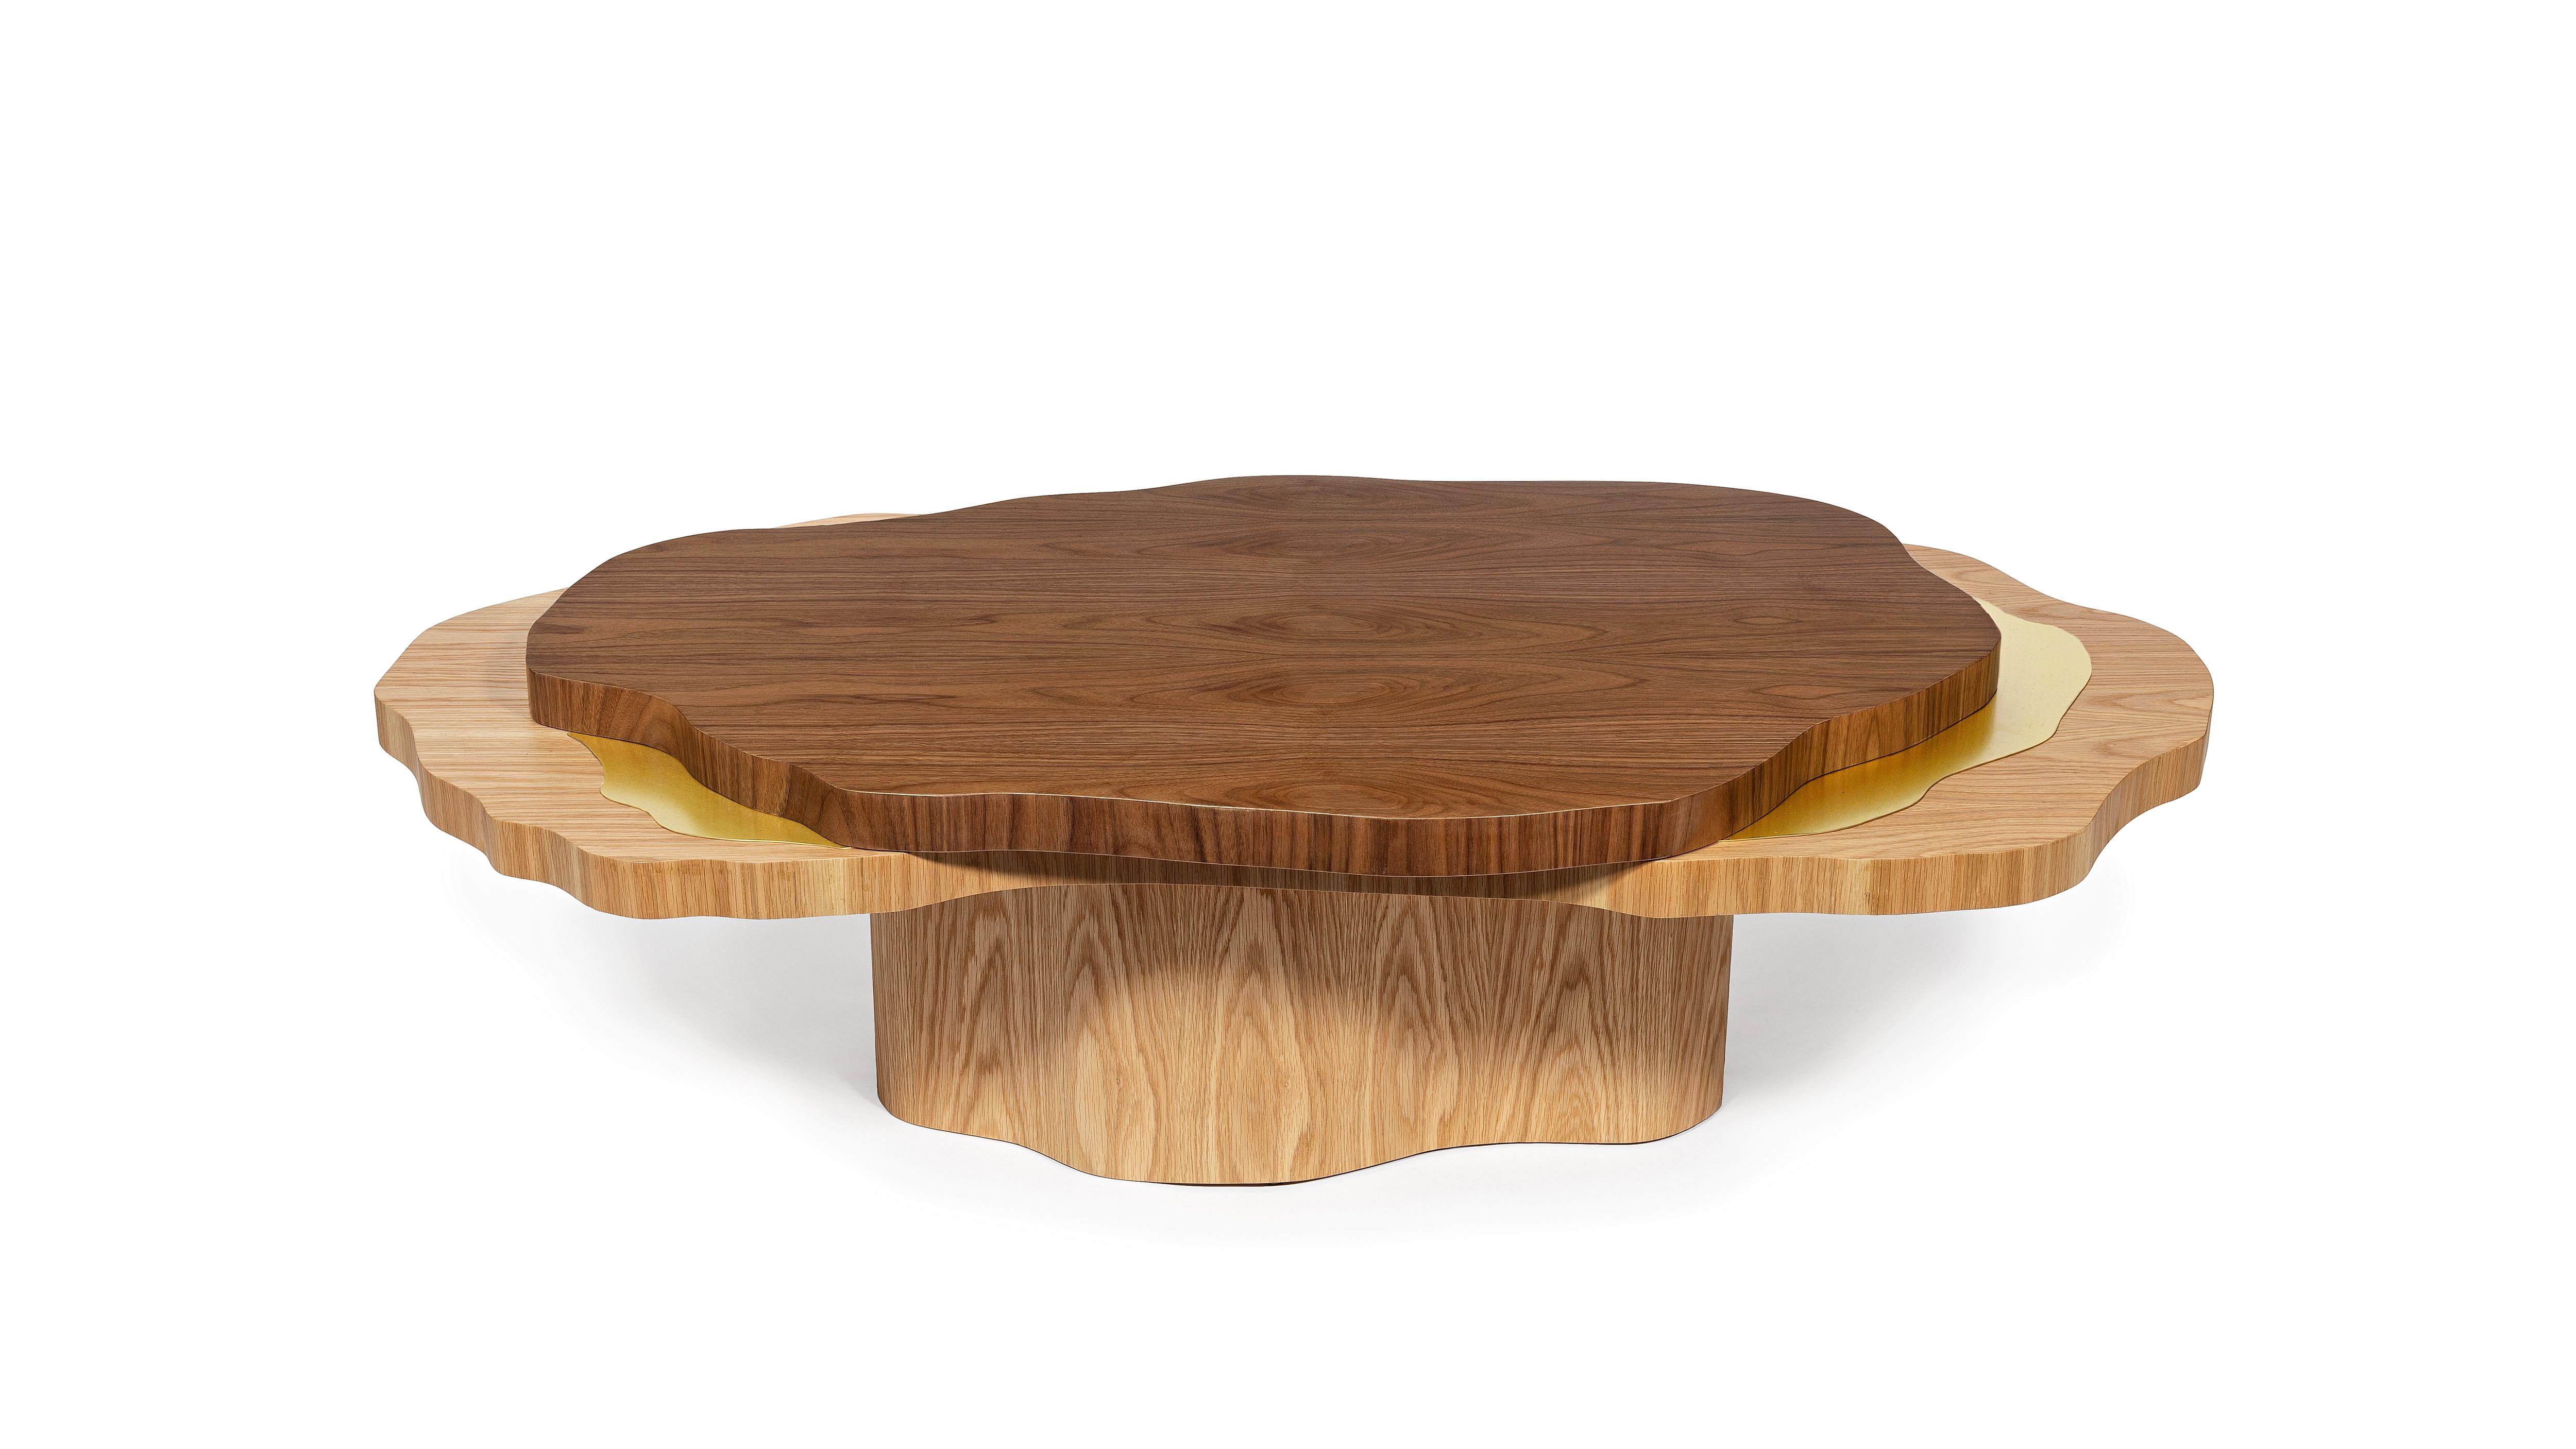 Arizona Coffee Table by InsidherLand
Dimensions: D 87 x W 140 x H 38 cm.
Materials: Walnut and oak veneer, brushed brass.
75 kg.

In the remote location of Coyote Buttes lies one of Arizona’s treasures. The Wave is a remarkable rock formation made